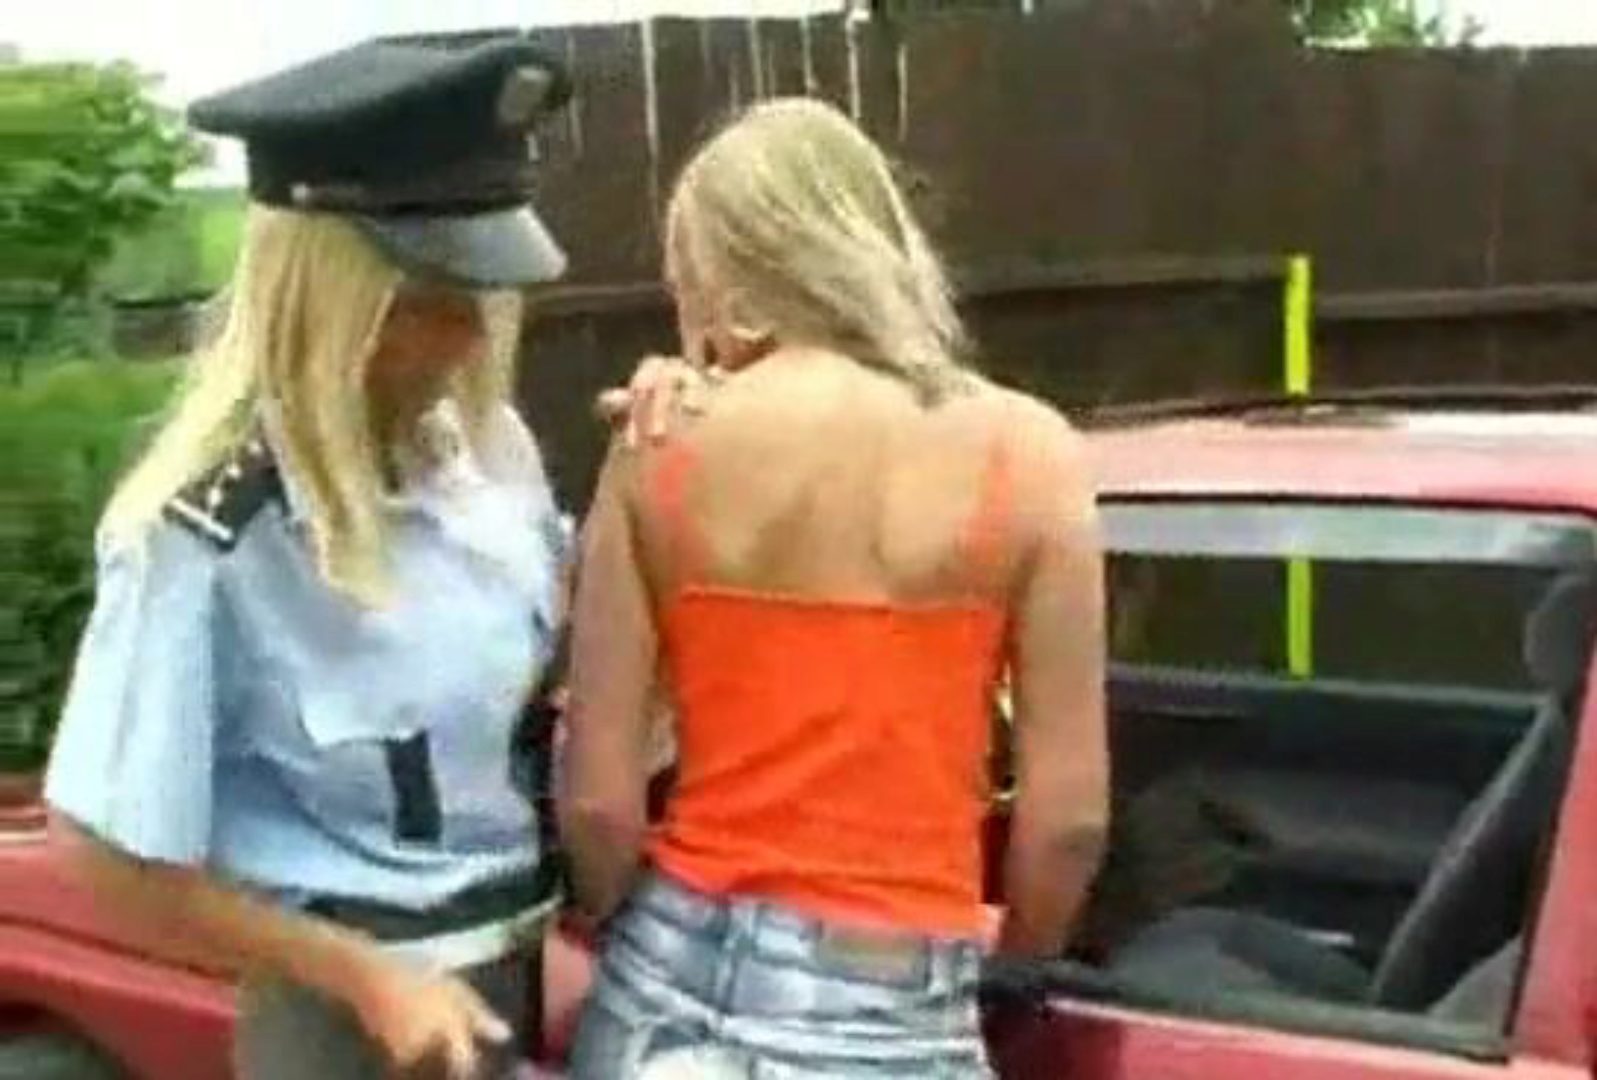 Policesexvideo - Xxx Video Police Sex Video India Police Officer S - XXX BULE